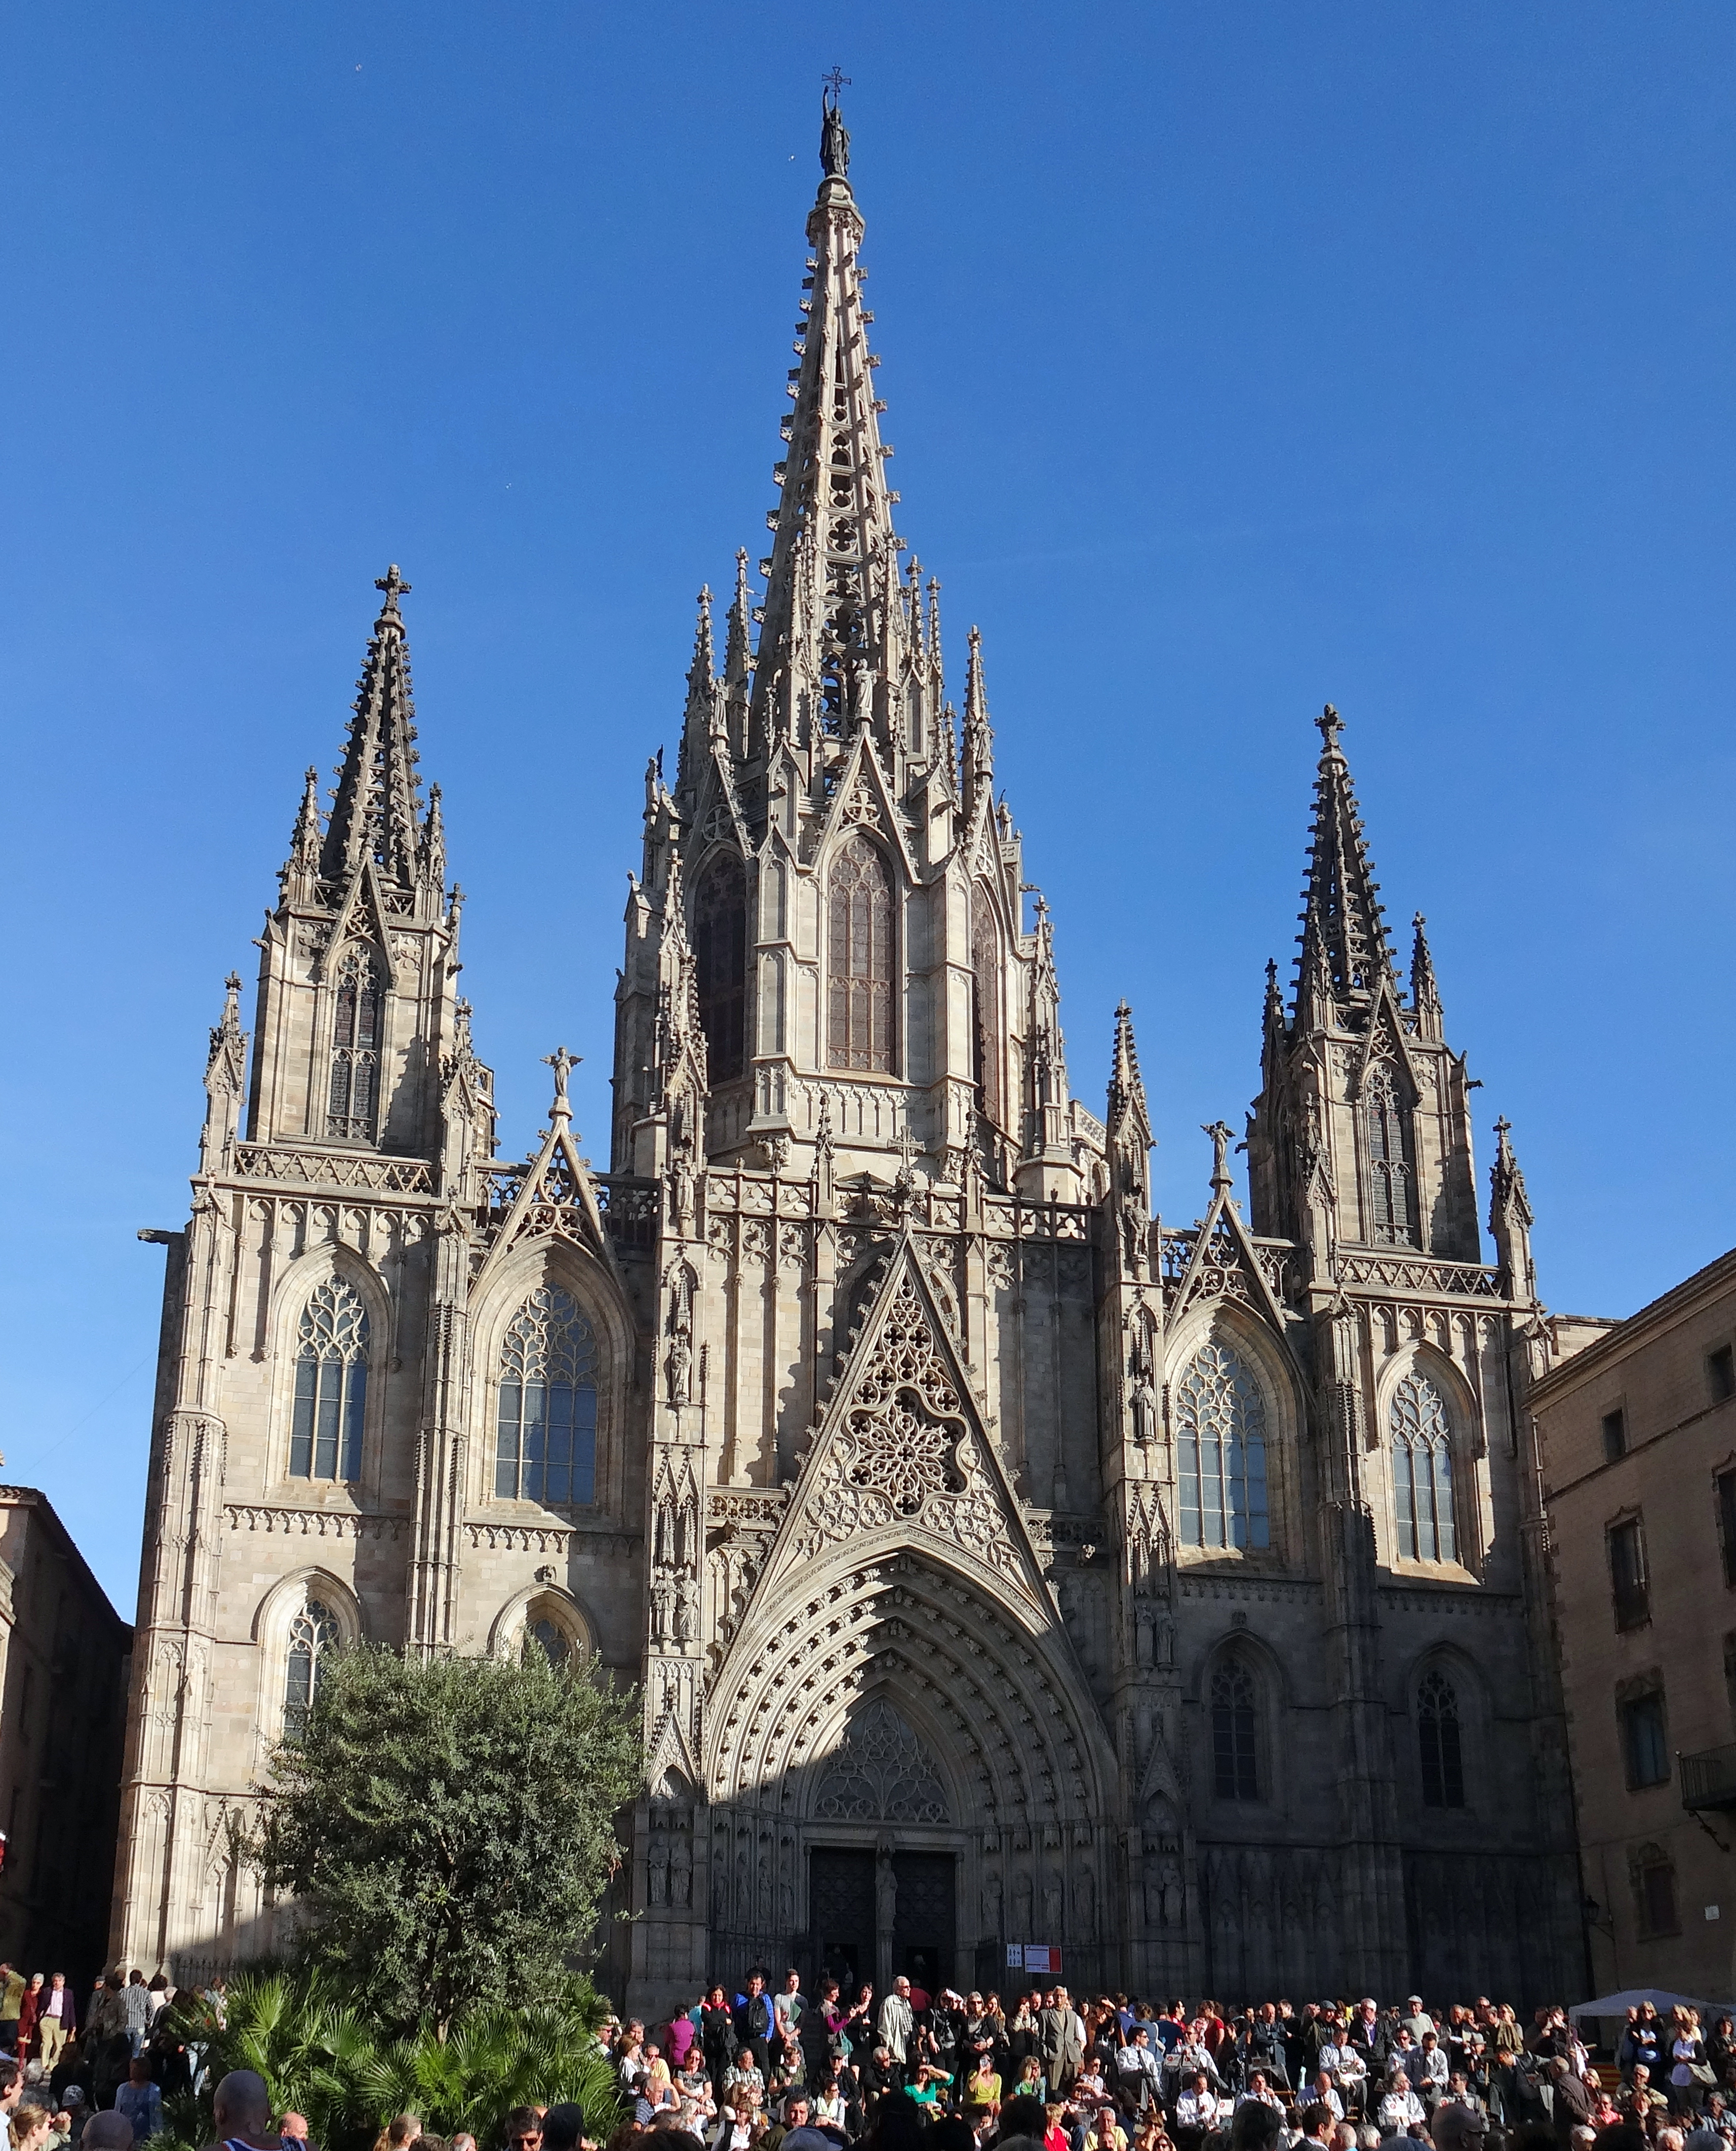 Download this Barcelona Cathedral With Its Multiple Open Frame Spires picture